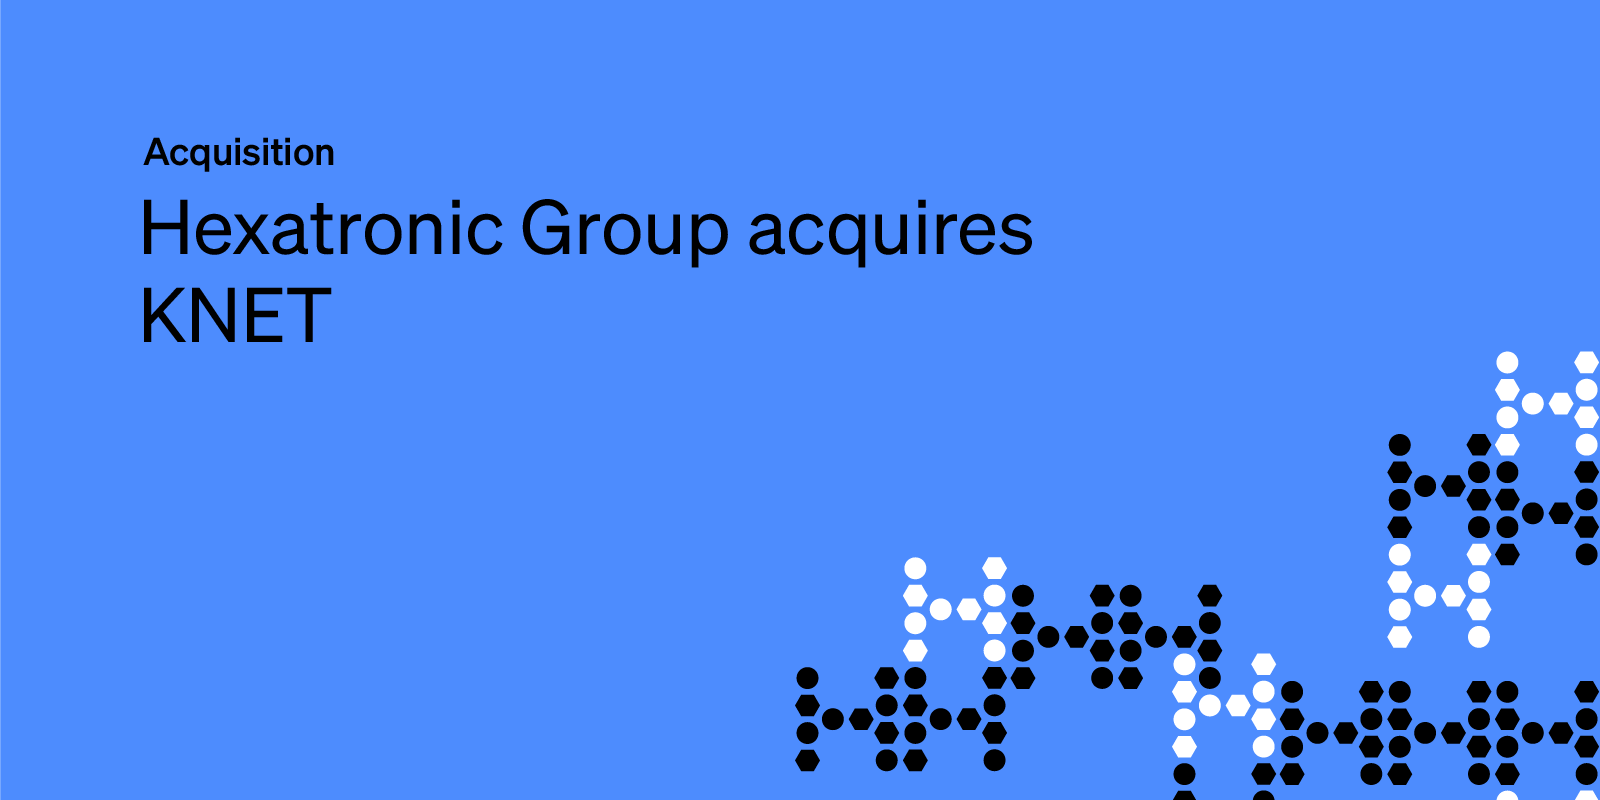 Hexatronic acquires leading microduct business KNET for an expected USD 63 million